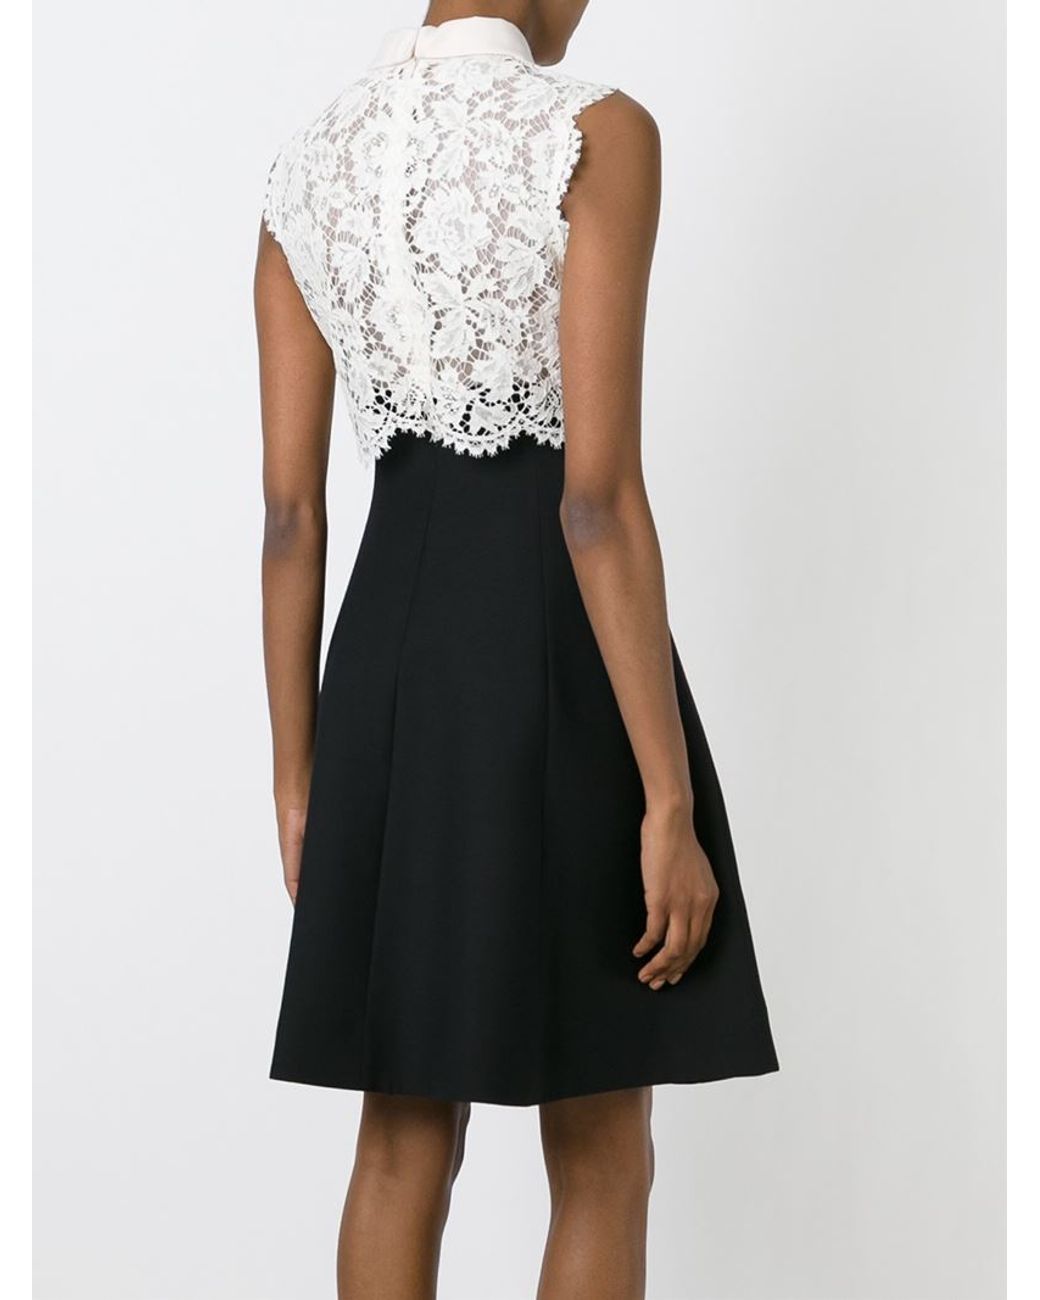 Valentino Lace Top Dress in Black | Lyst